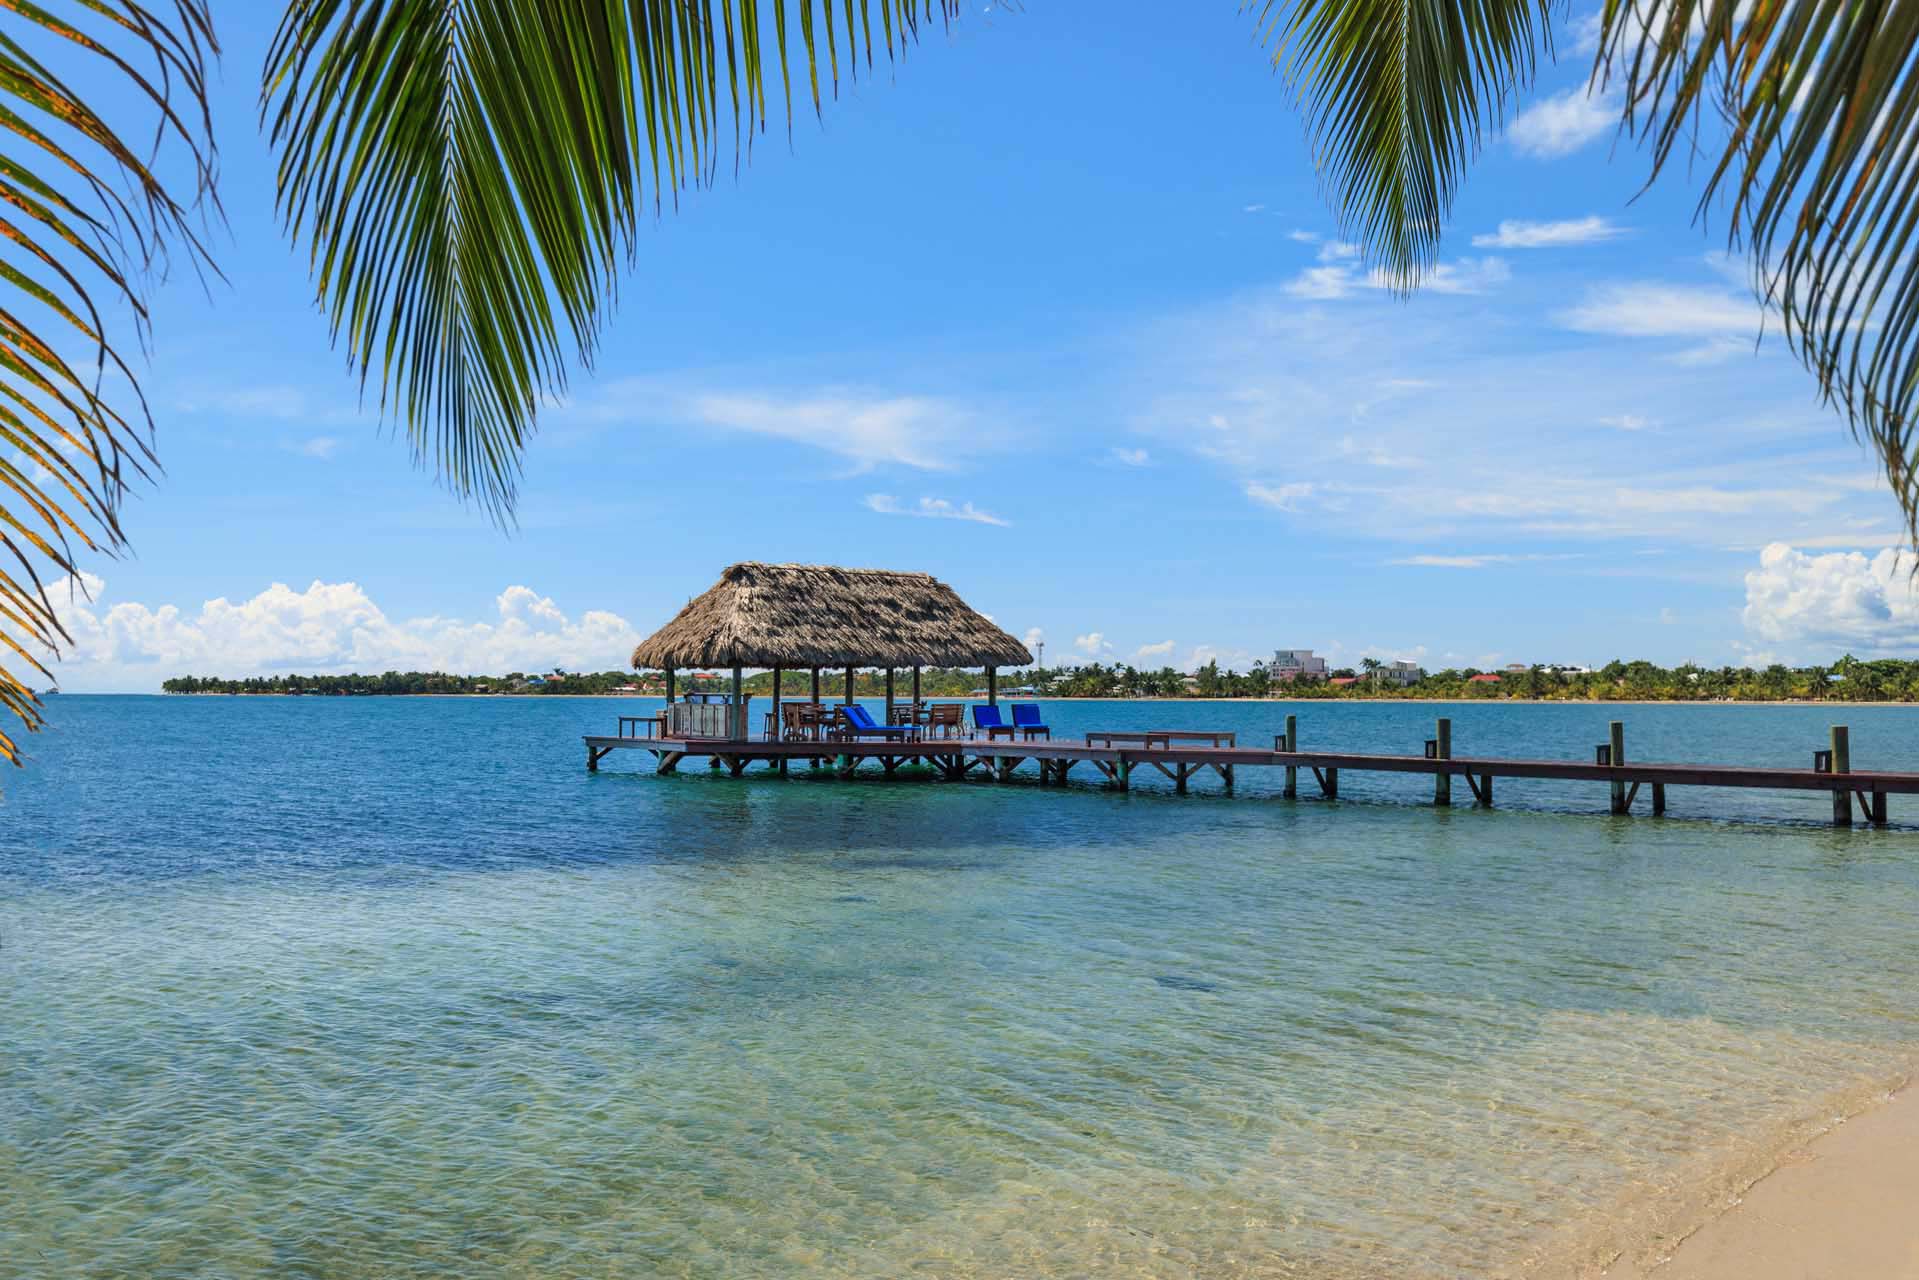 Covered dock with thatched roof set over the ocean at Chabil Mar Villas